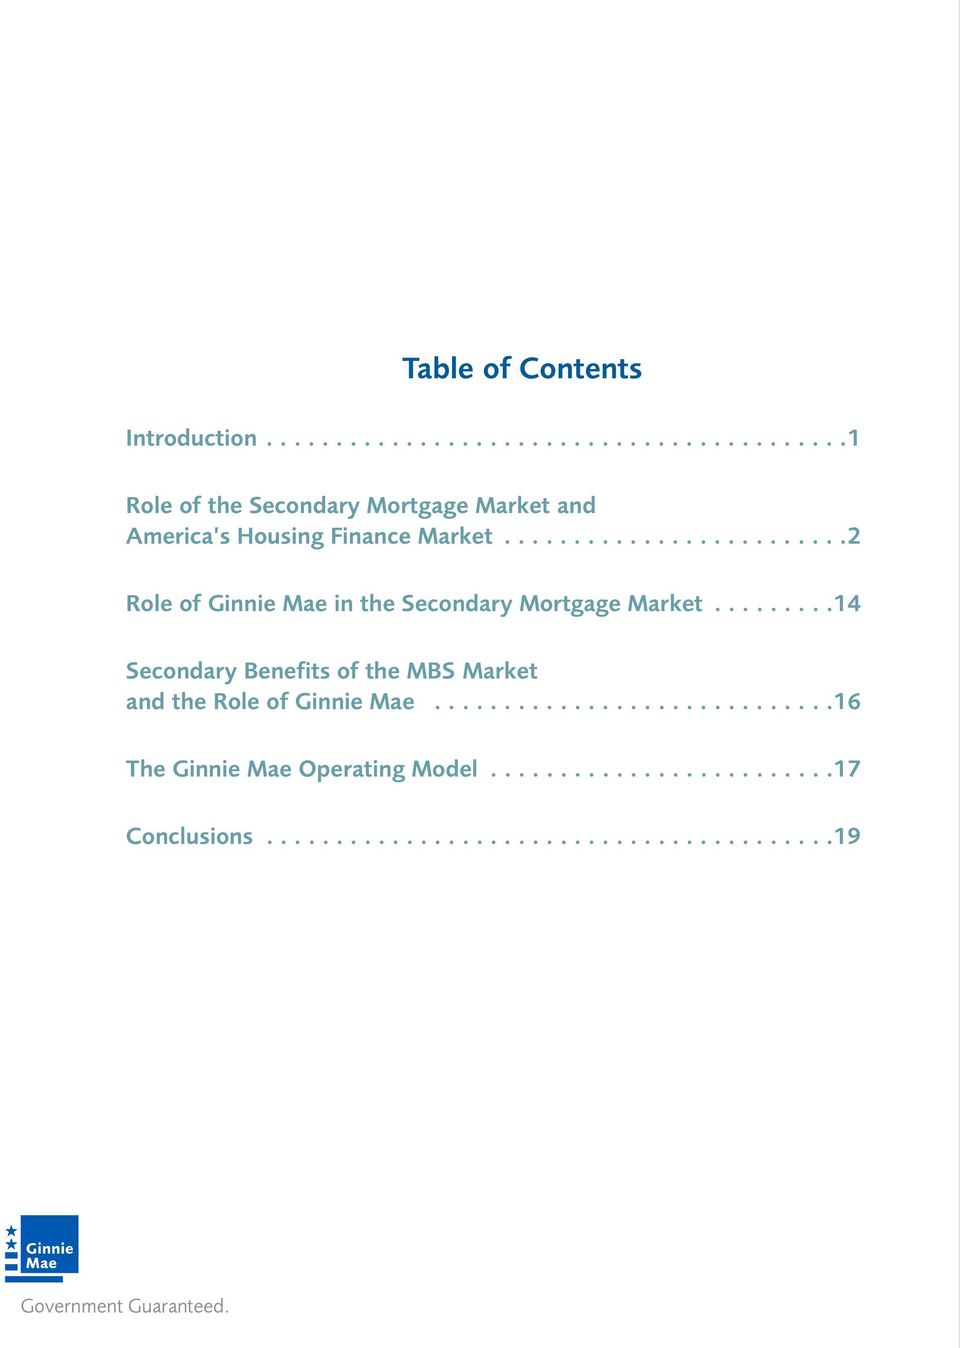 ........14 Secondary Benefits of the MBS Market and the Role of Ginnie Mae.............................16 The Ginnie Mae Operating Model.